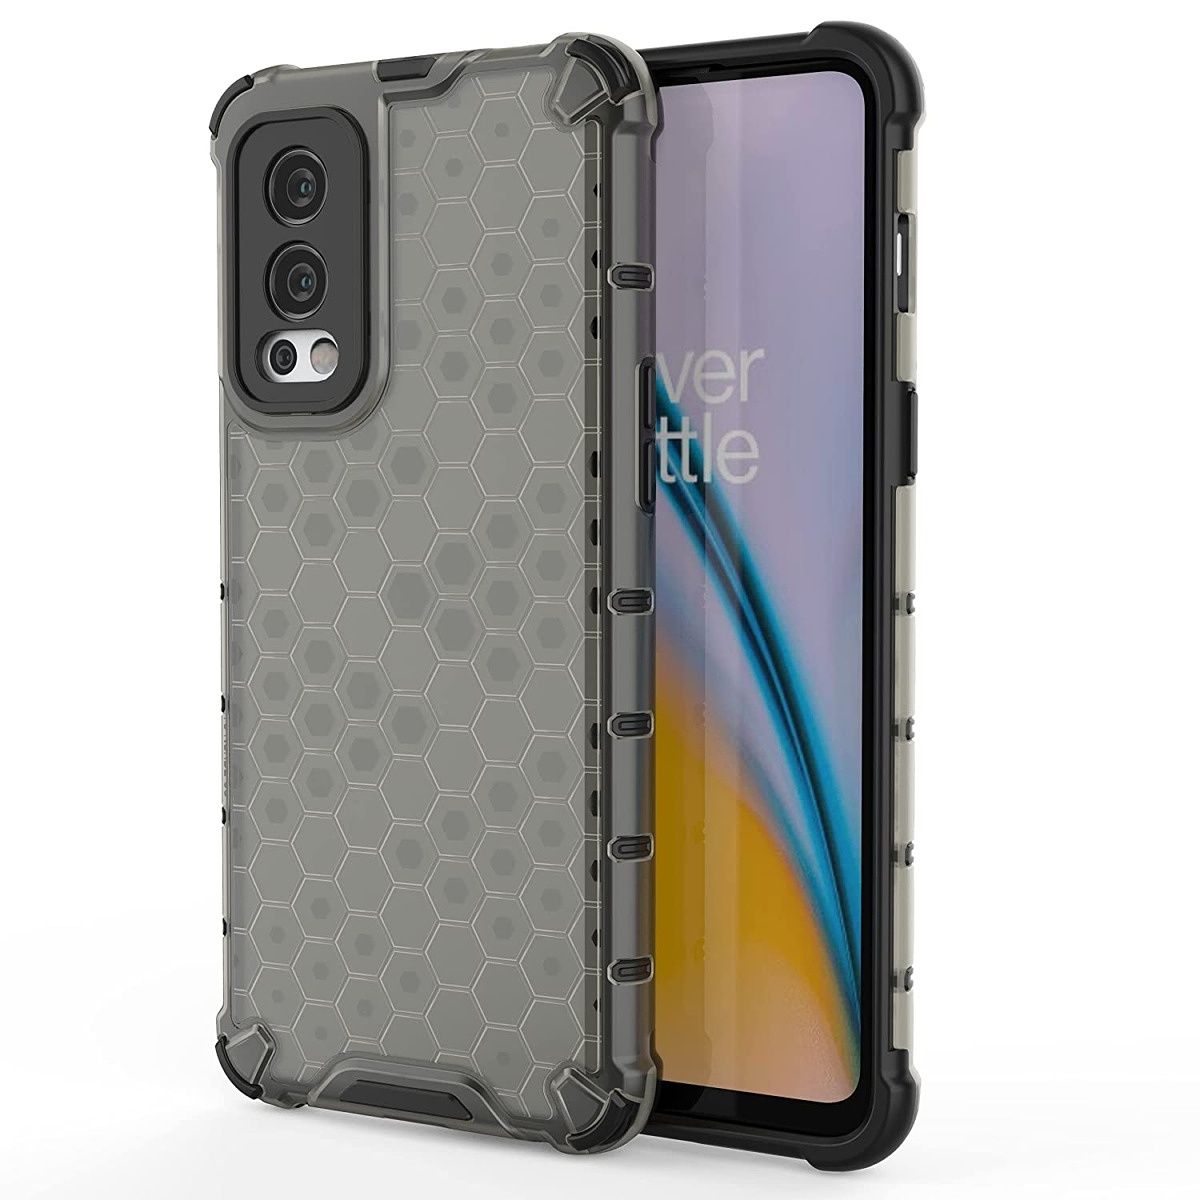 If you keep dropping your phone often and are scared of cracking the screen or the back, this case will keep your phone safe.